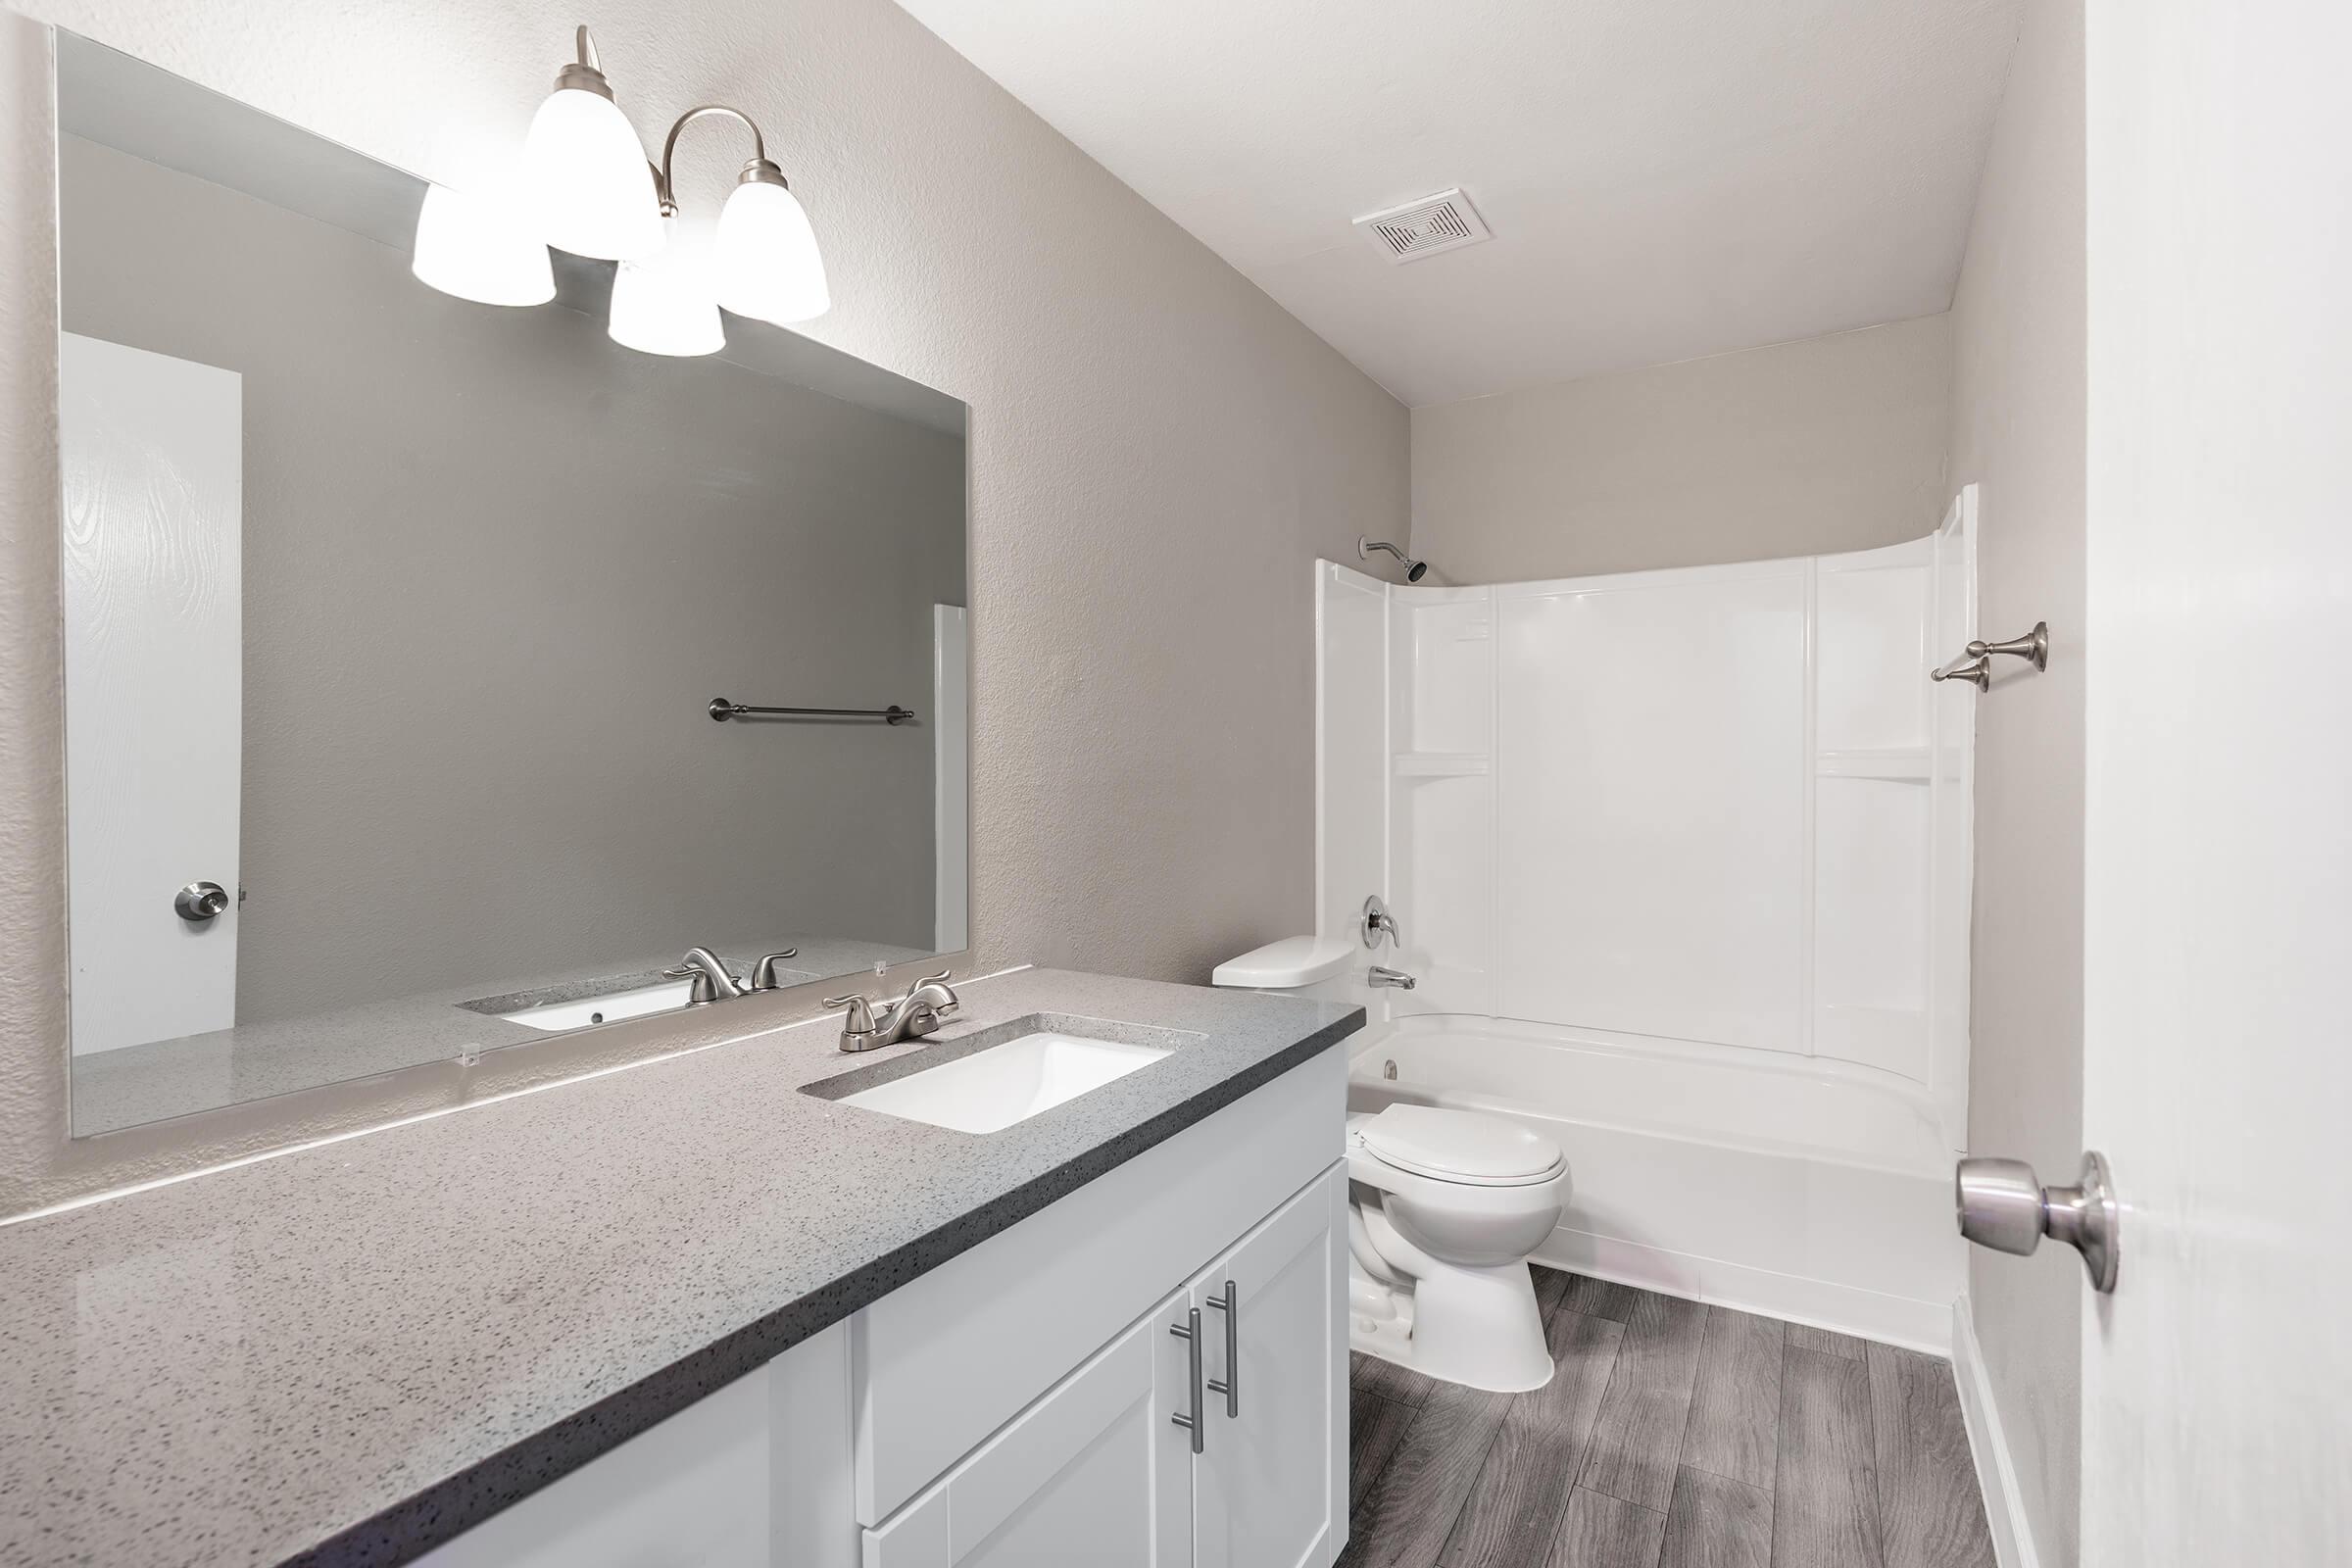 Bright renovated bathroom with quartz countertops and a large mirror